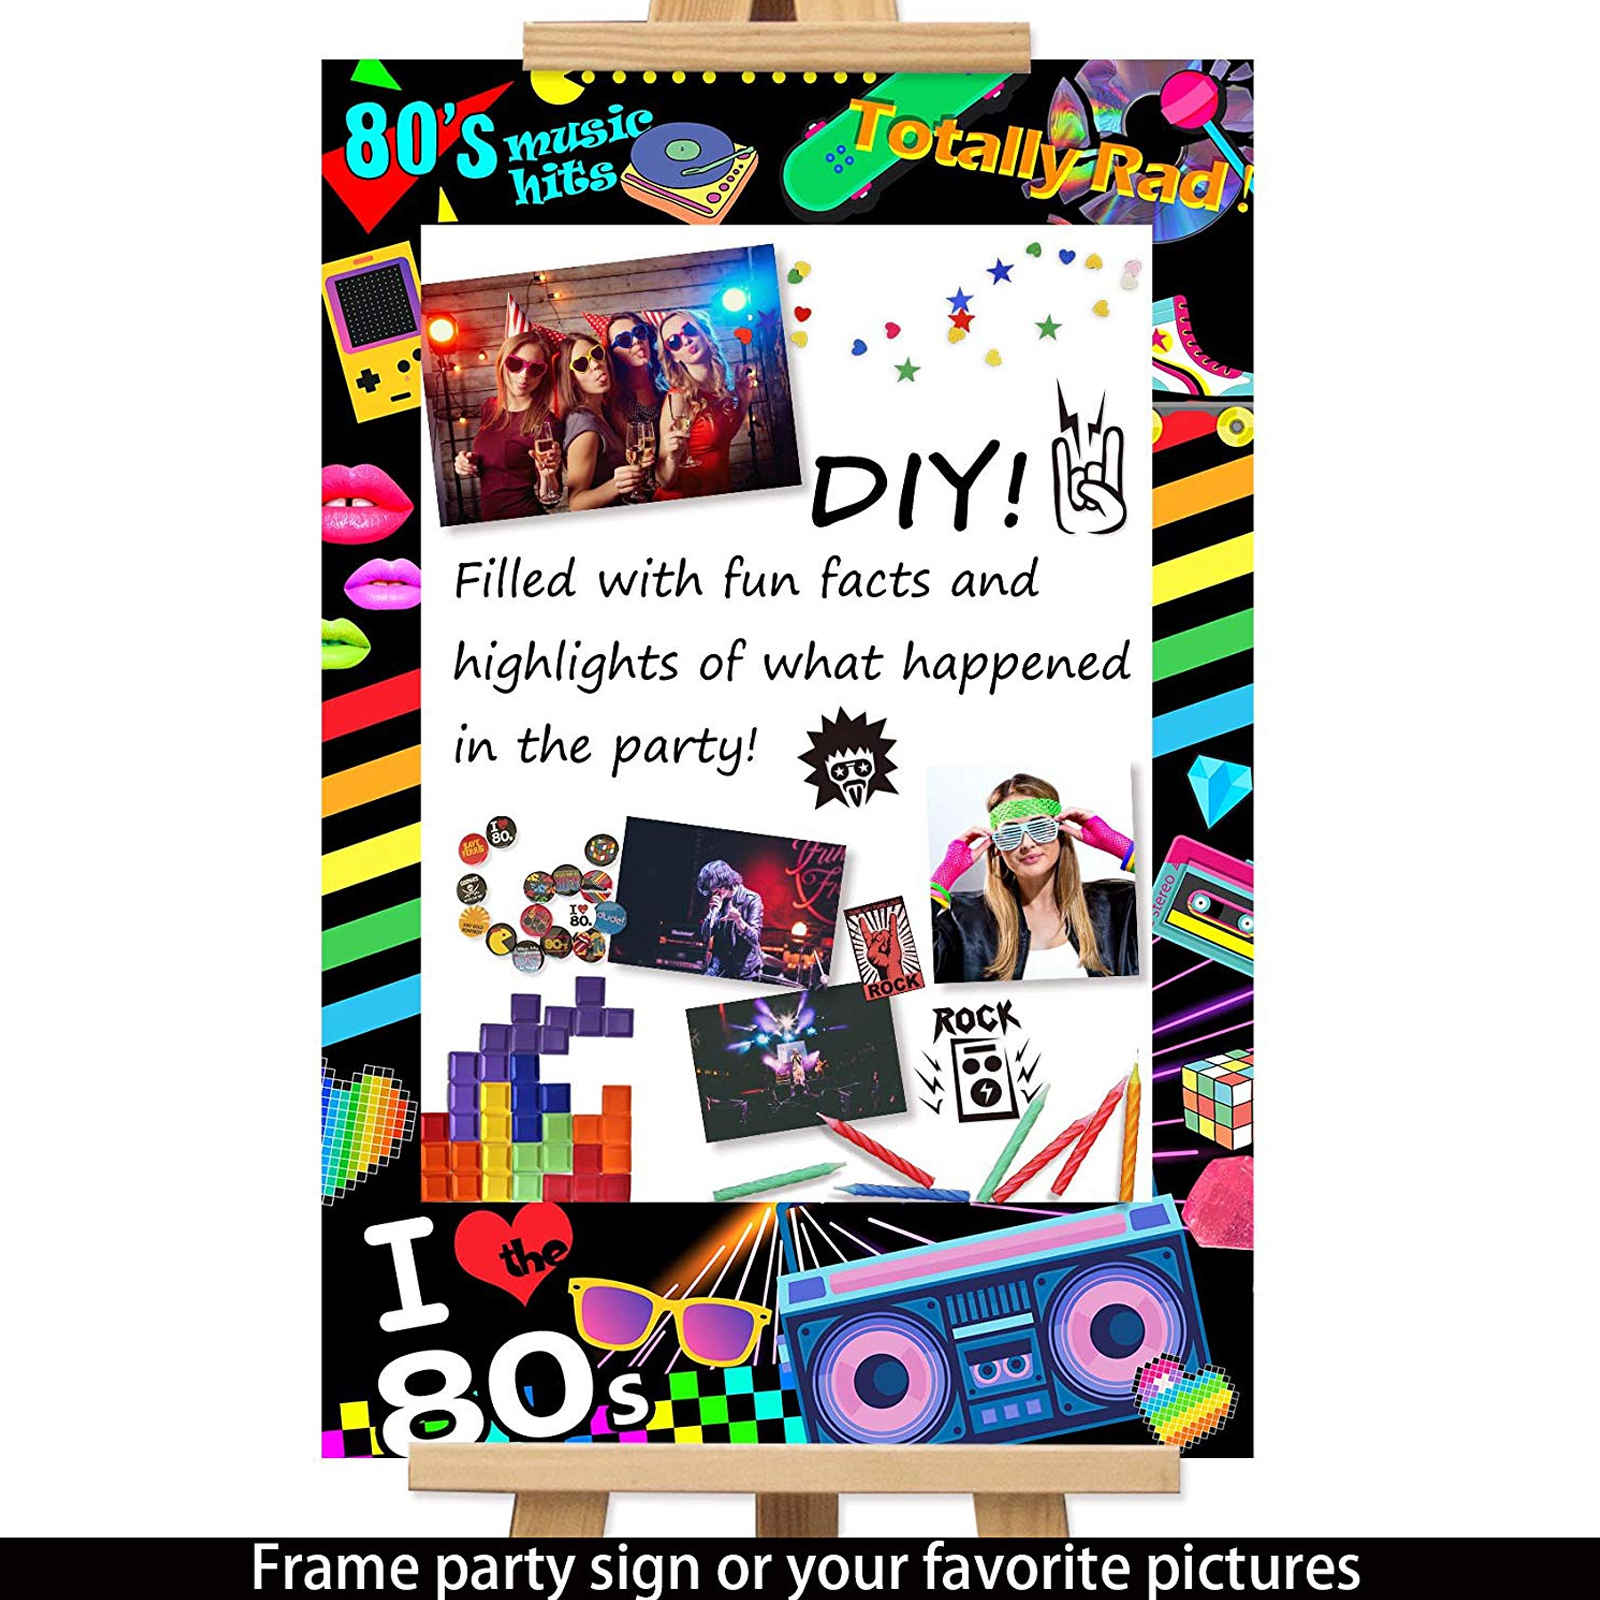 I Love 80s Photo Booth Frame Photobooth Props Retro Music Dance Party Selfie Ebay